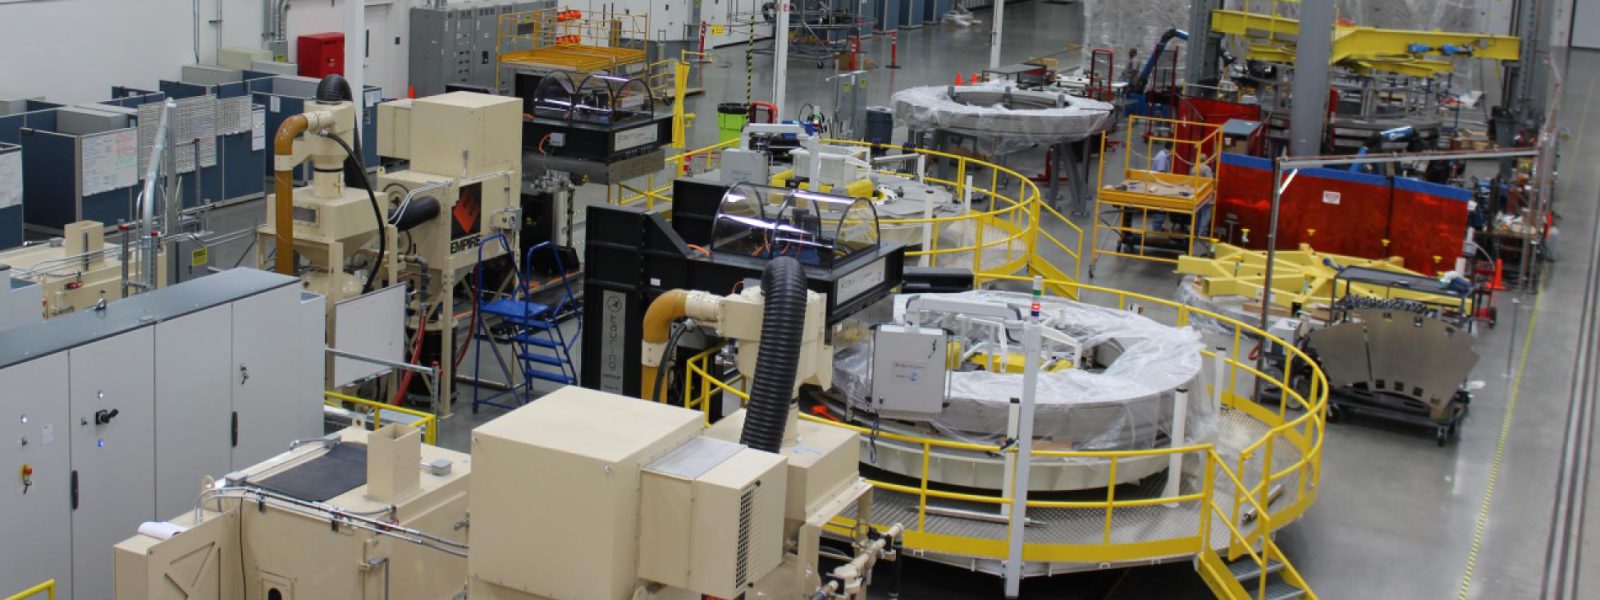 A partial view of the General Atomics module fabrication line, with two winding station tables visible behind a yellow rail. Photo: GA